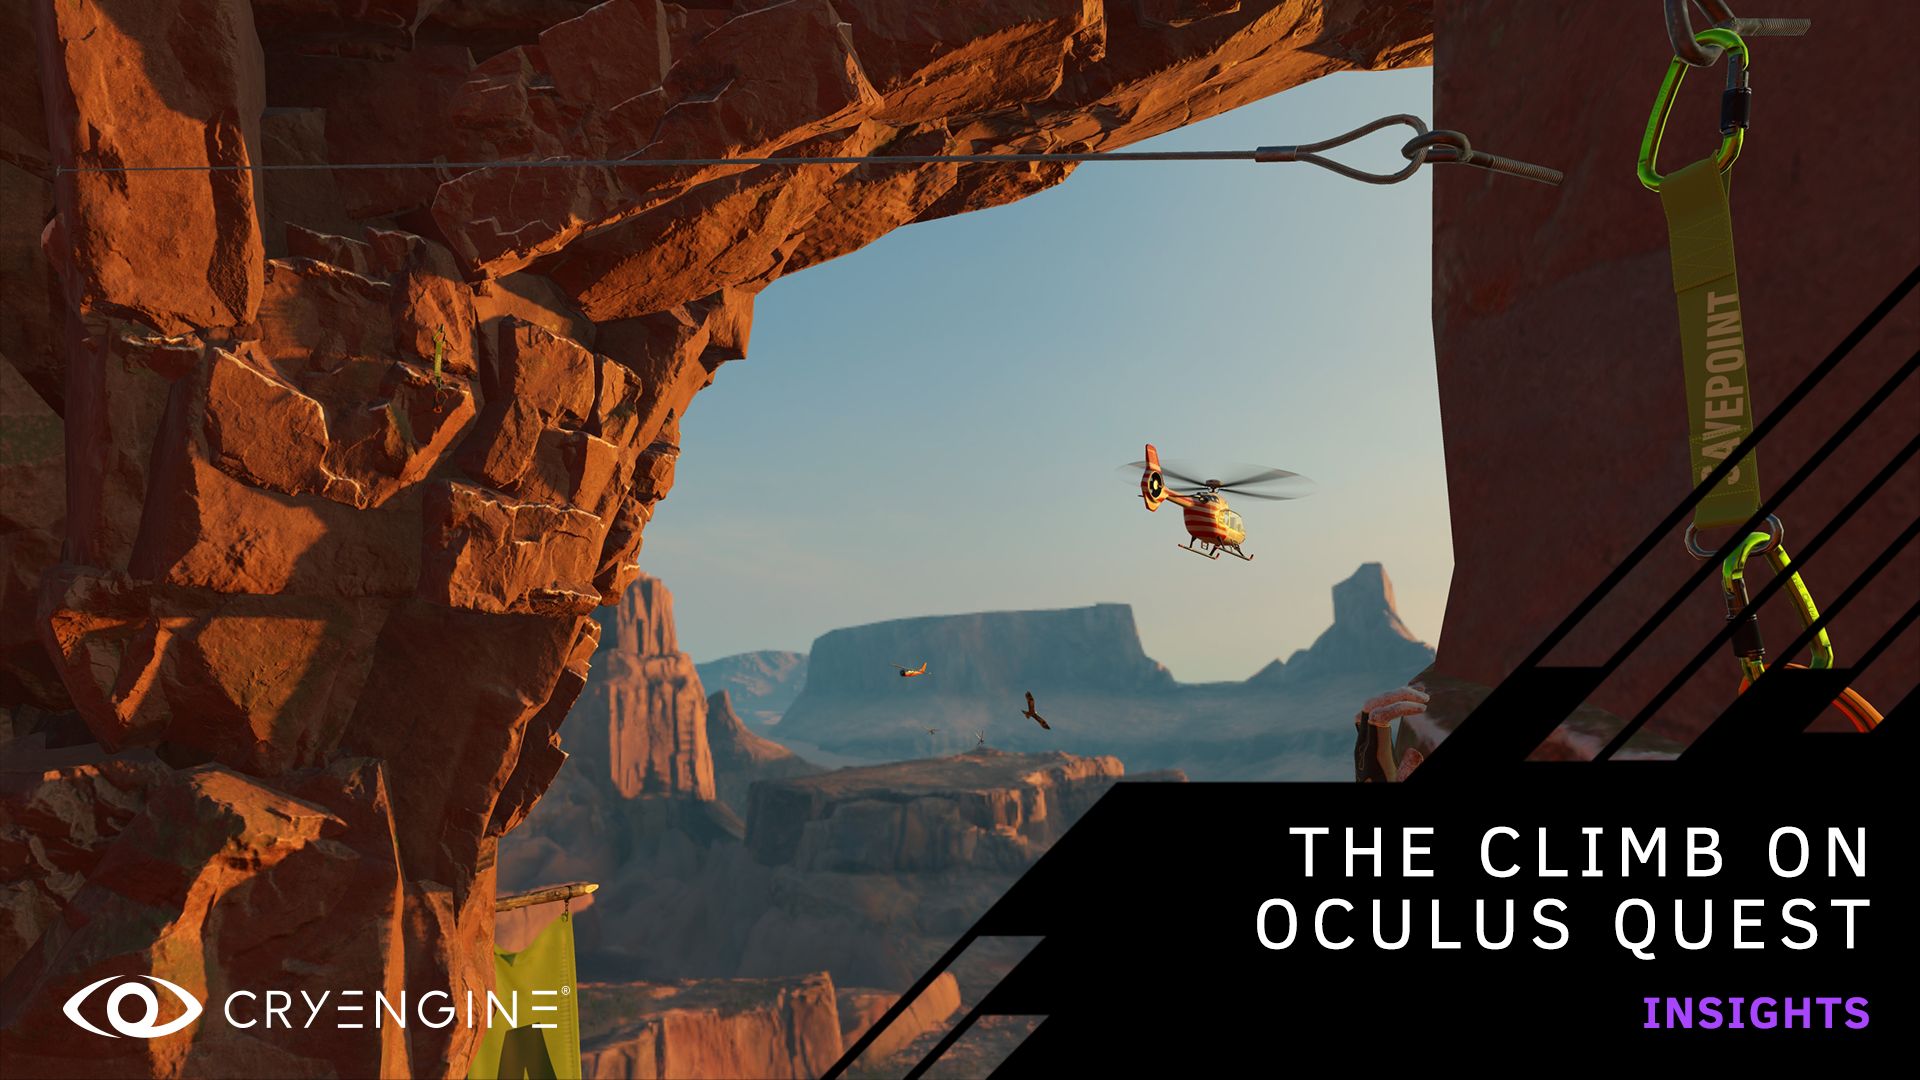 The Climb 2 Oculus Quest 2. Climb 2 VR Oculus. The Climb игра ВР. [VR Oculus Quest/Quest 2] the Climb. Как пройти a difficult game about climbing